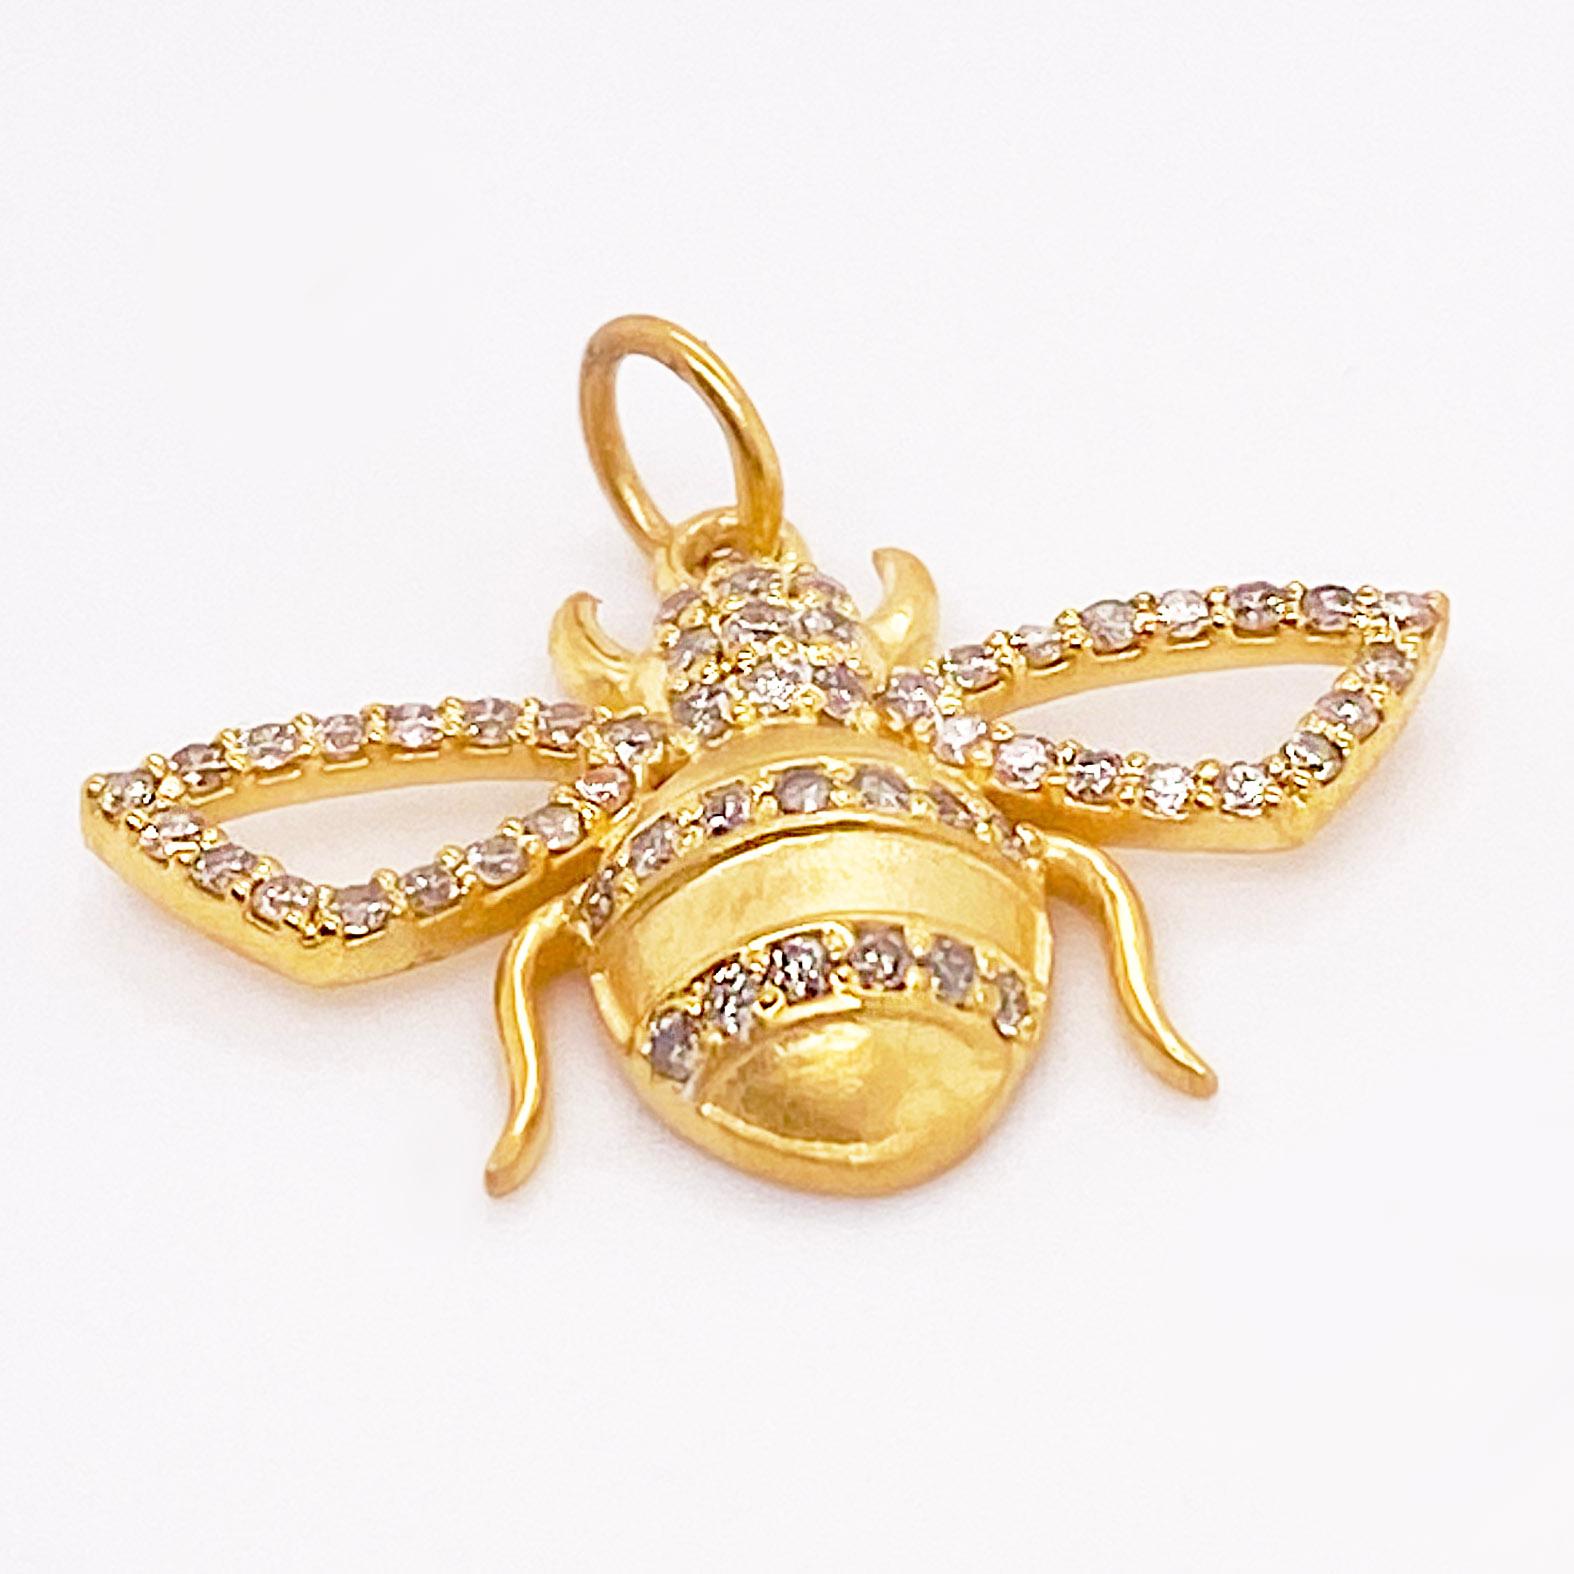 Bees are such an important part of our world and that is why we love wearing them! If you are the Queen Bee you need this pendant! This pendant is so cute and has 55 diamonds in shared prongs allowing it to shine as much as it deserves. This bumble